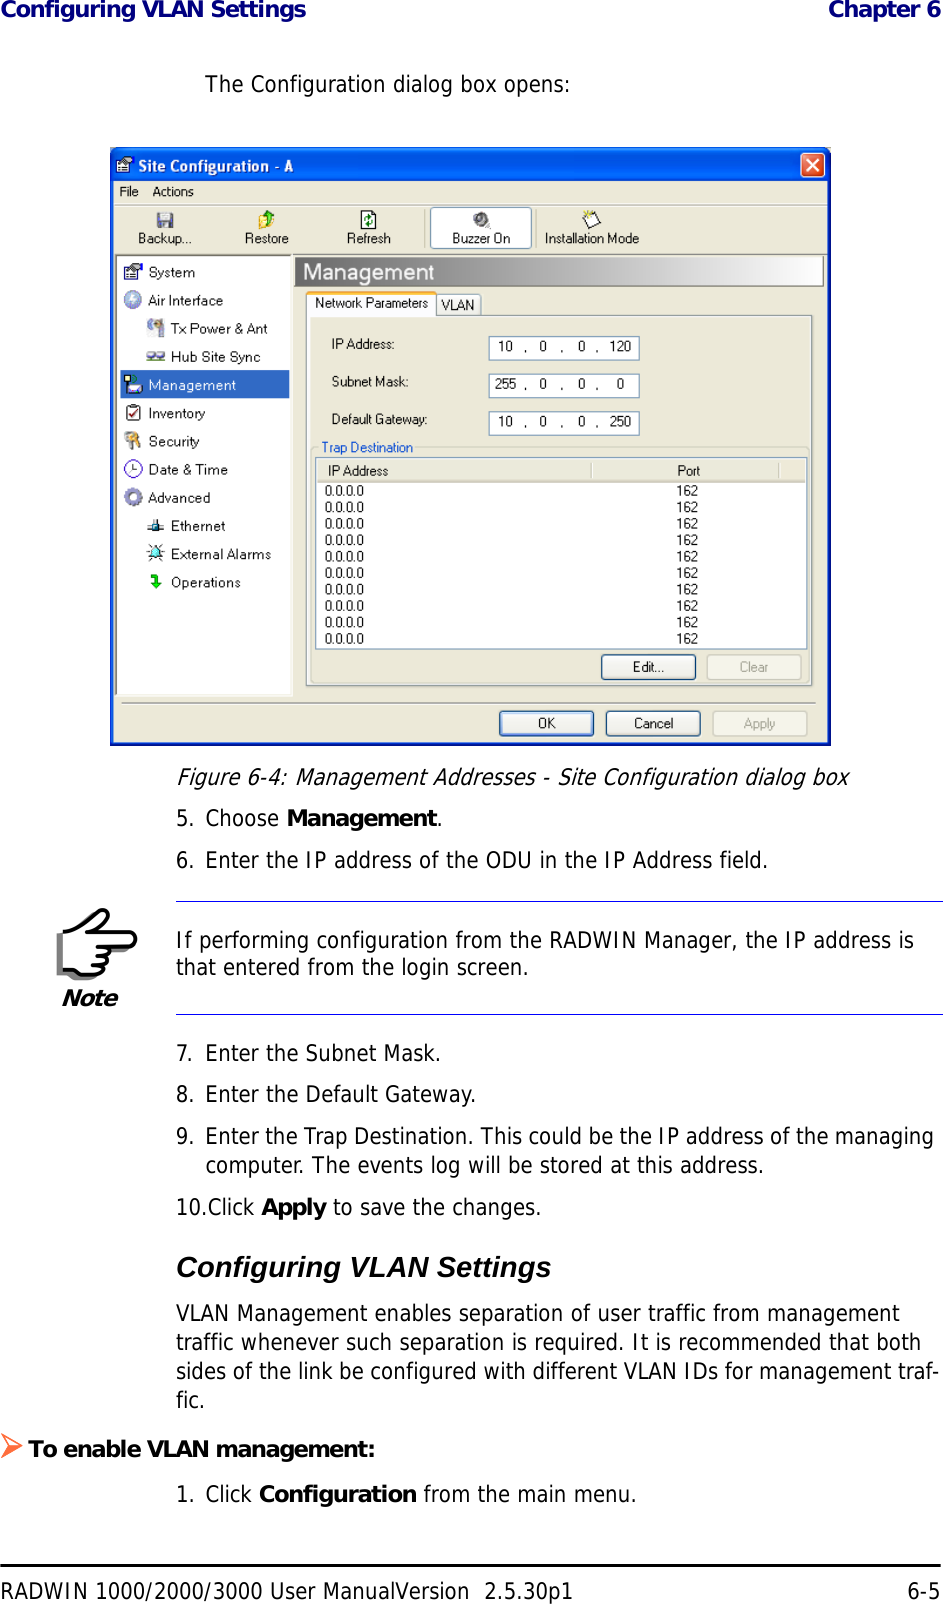 Configuring VLAN Settings  Chapter 6RADWIN 1000/2000/3000 User ManualVersion  2.5.30p1 6-5The Configuration dialog box opens:Figure 6-4: Management Addresses - Site Configuration dialog box5. Choose Management.6. Enter the IP address of the ODU in the IP Address field.7. Enter the Subnet Mask.8. Enter the Default Gateway.9. Enter the Trap Destination. This could be the IP address of the managing computer. The events log will be stored at this address.10.Click Apply to save the changes.Configuring VLAN SettingsVLAN Management enables separation of user traffic from management traffic whenever such separation is required. It is recommended that both sides of the link be configured with different VLAN IDs for management traf-fic.¾To enable VLAN management:1. Click Configuration from the main menu.NoteIf performing configuration from the RADWIN Manager, the IP address is that entered from the login screen.